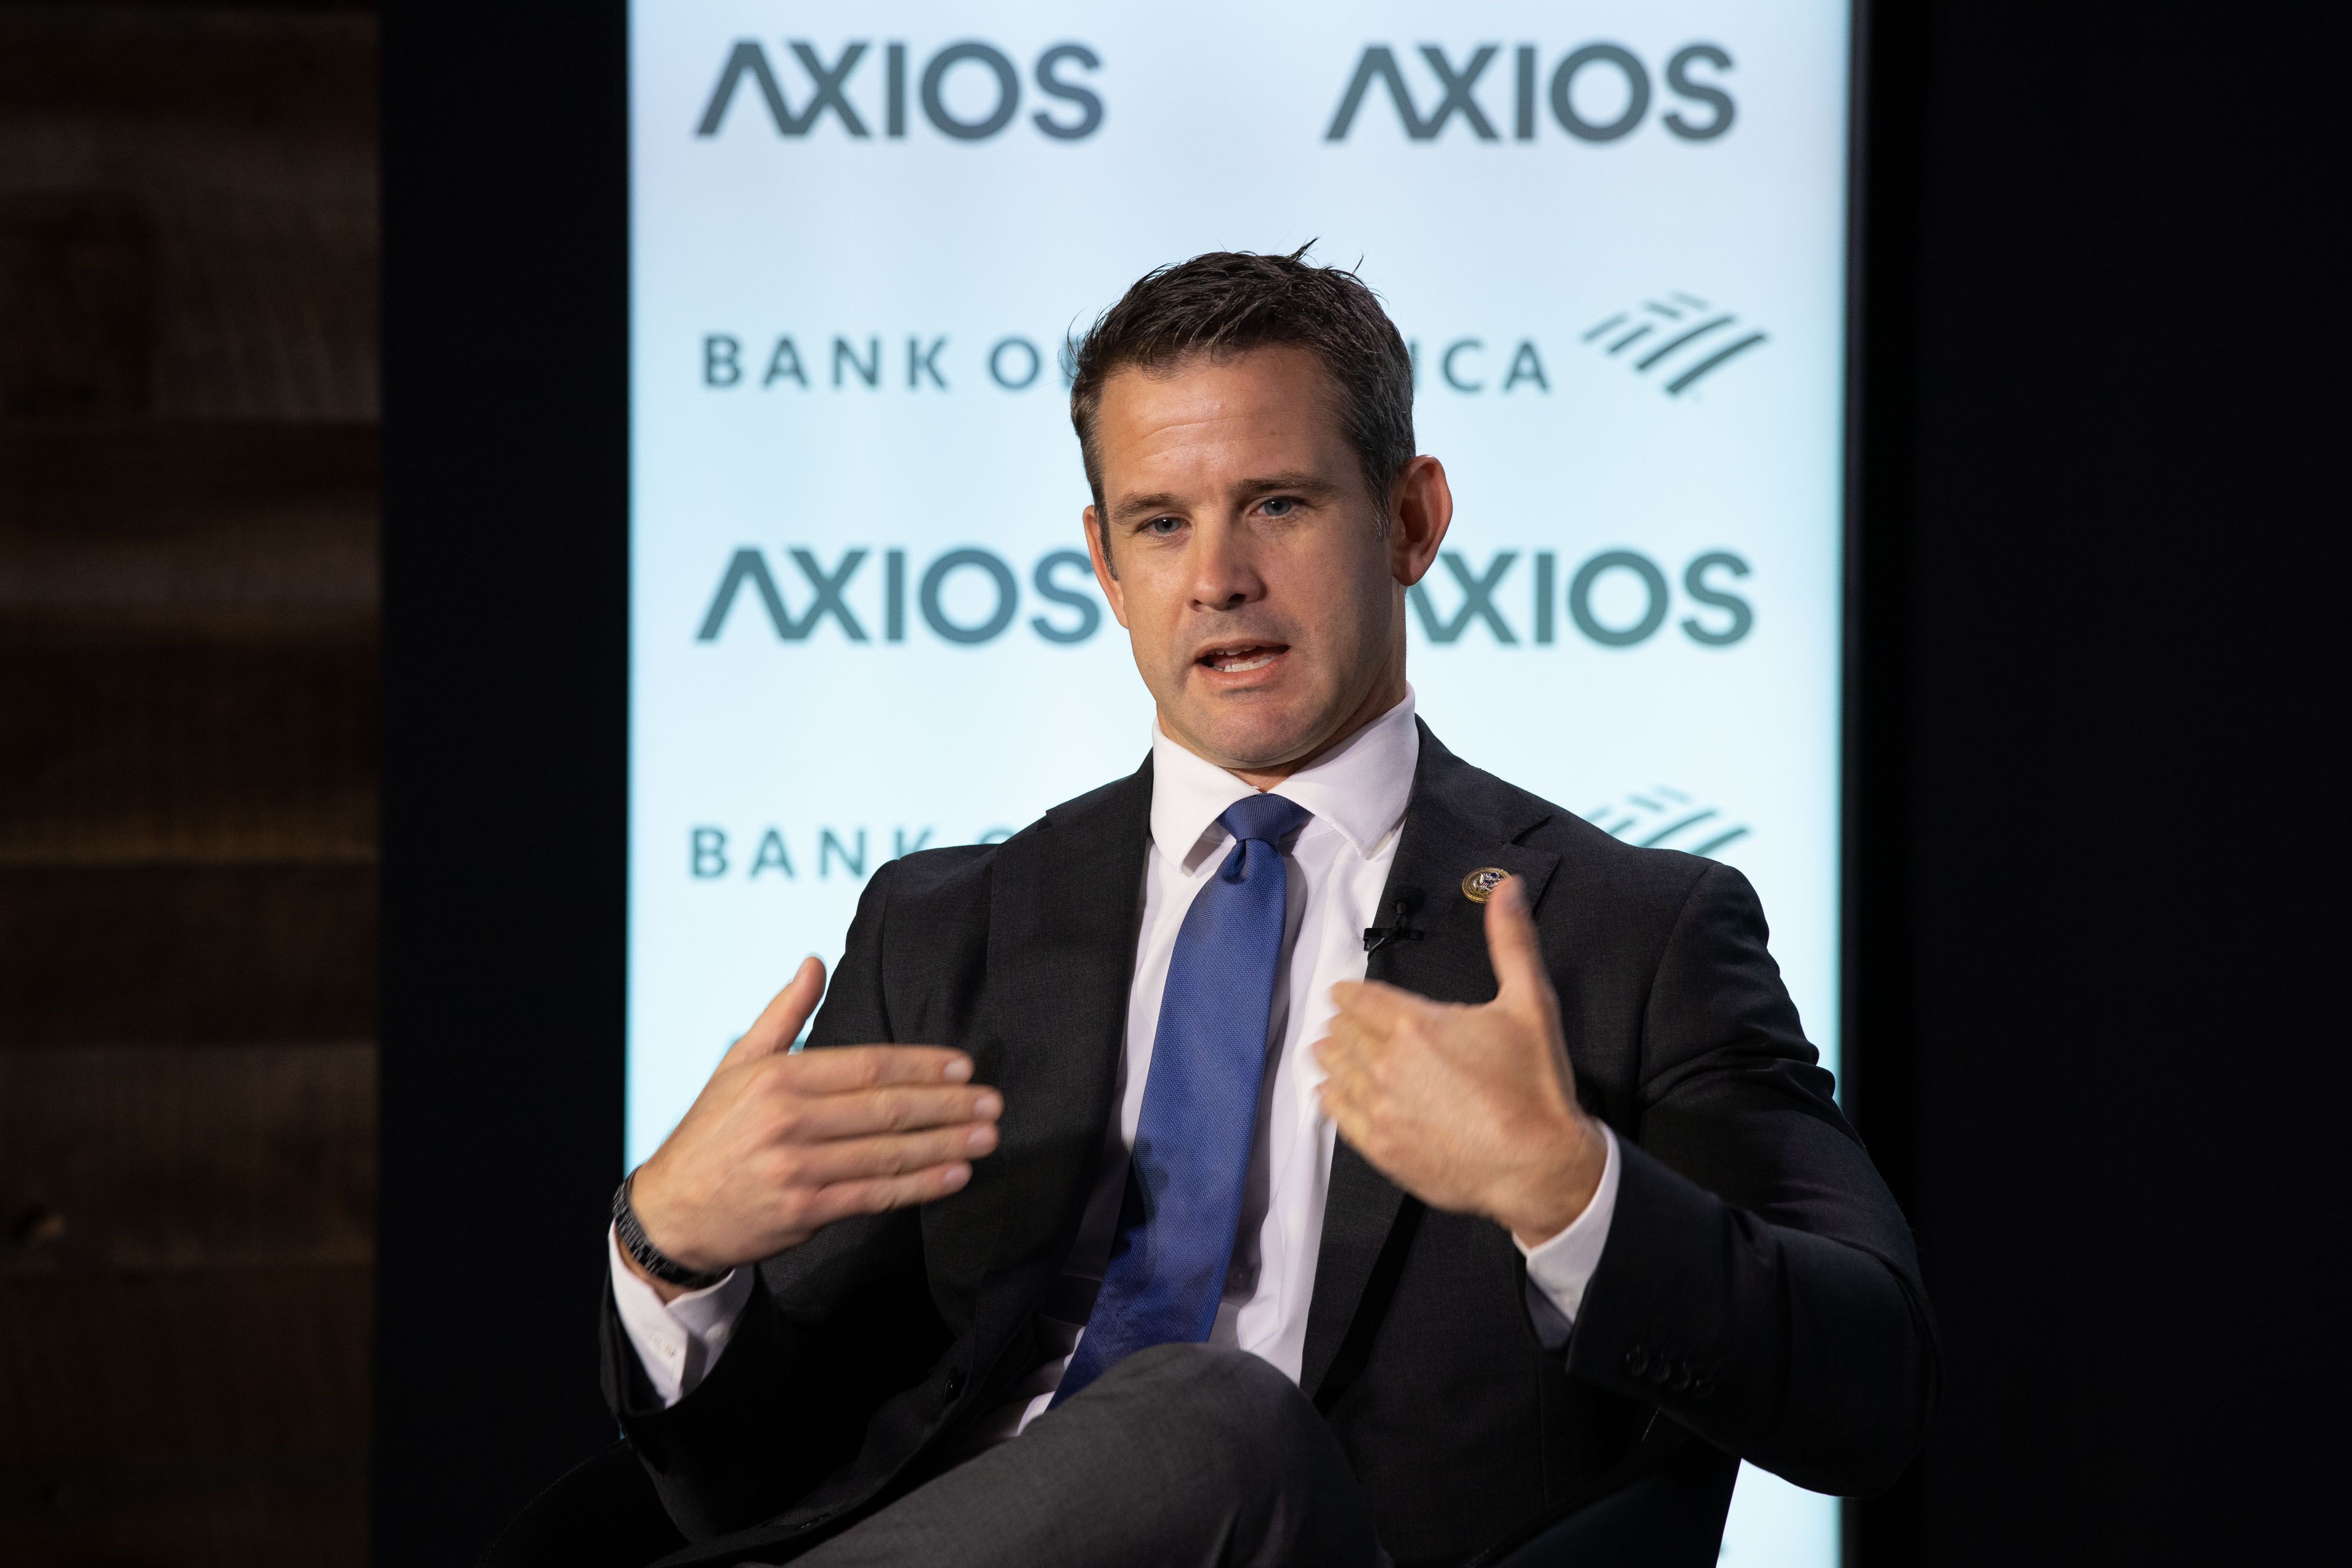 Rep. Adam Kinzinger on the Axios stage.